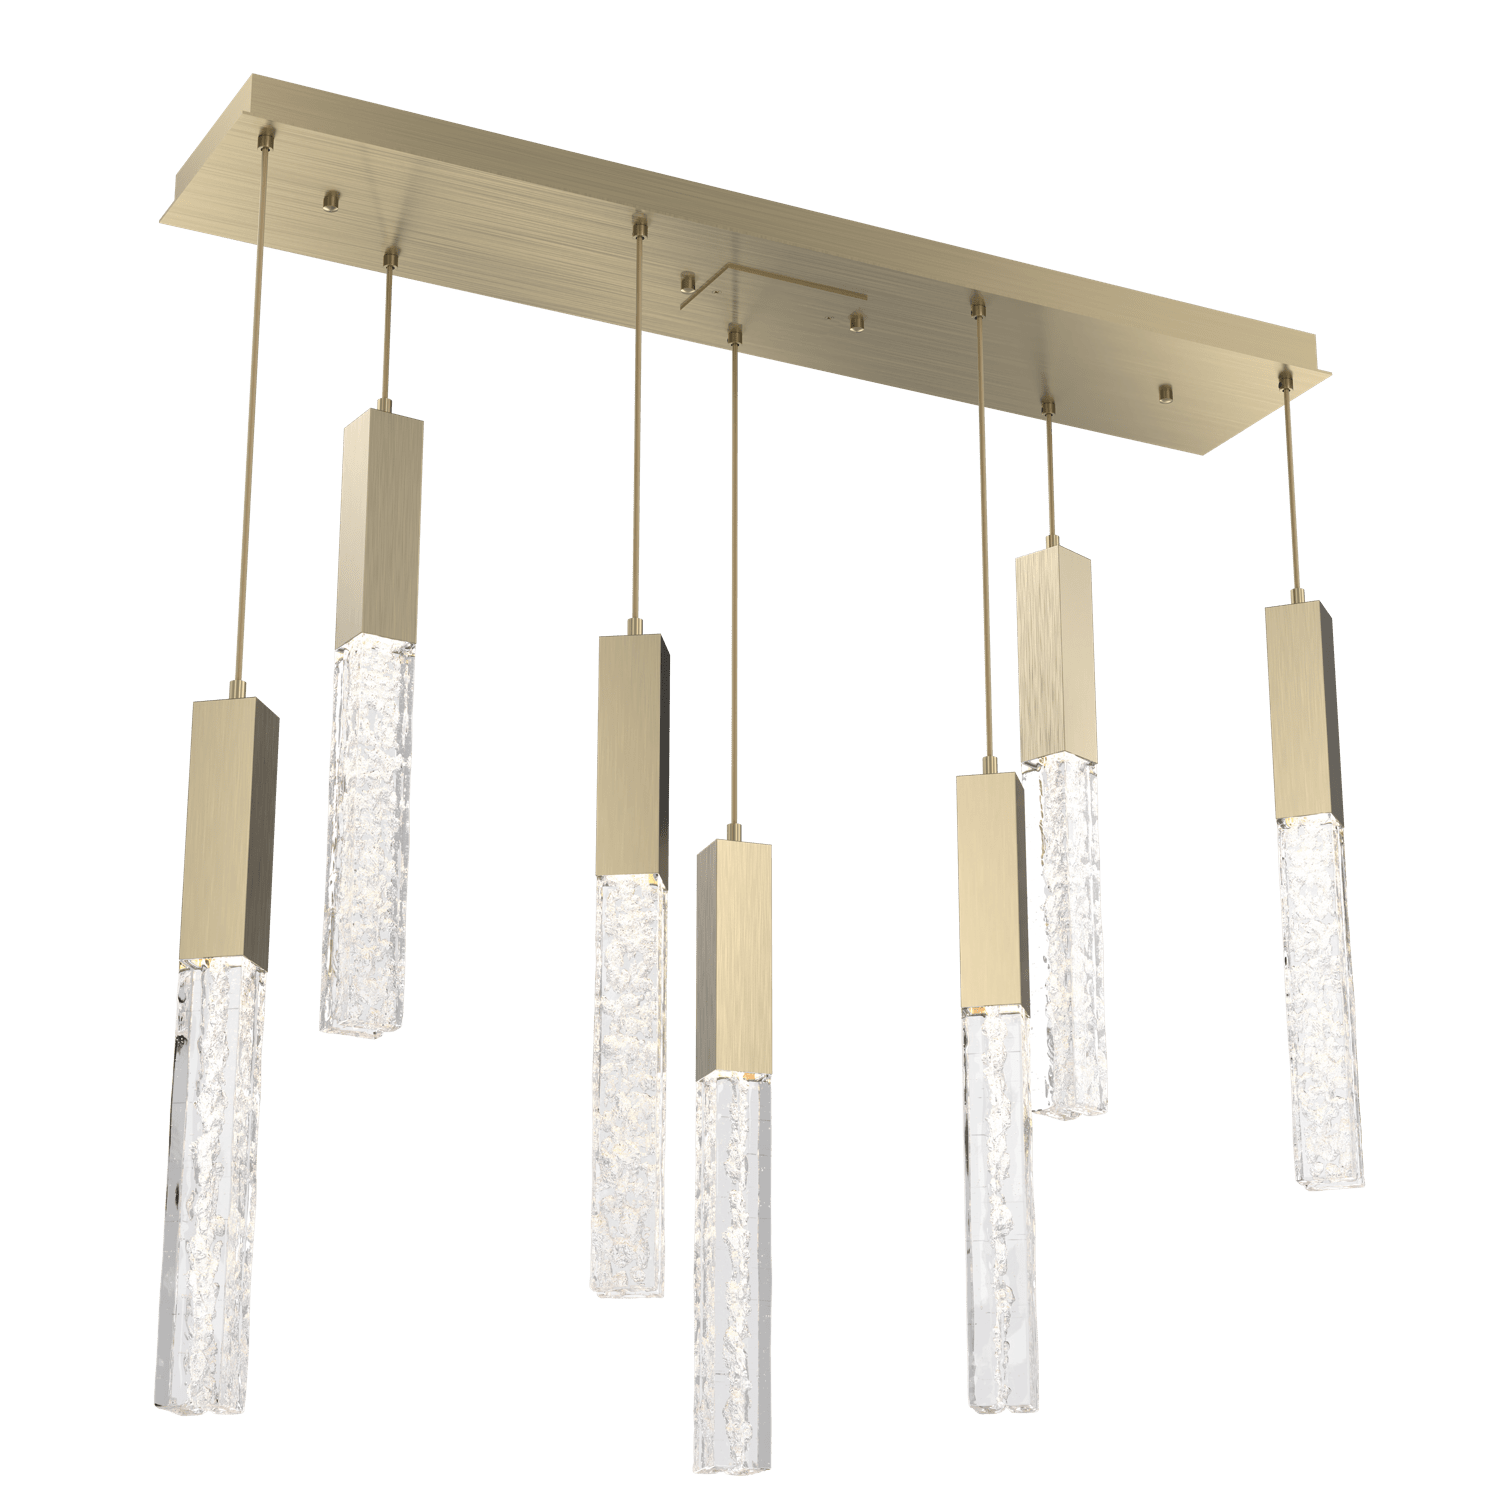 PLB0060-07-HB-GC-Hammerton-Studio-Axis-7-Light-Linear-Pendant-Chandelier-with-Heritage-Brass-finish-and-clear-cast-glass-and-LED-lamping